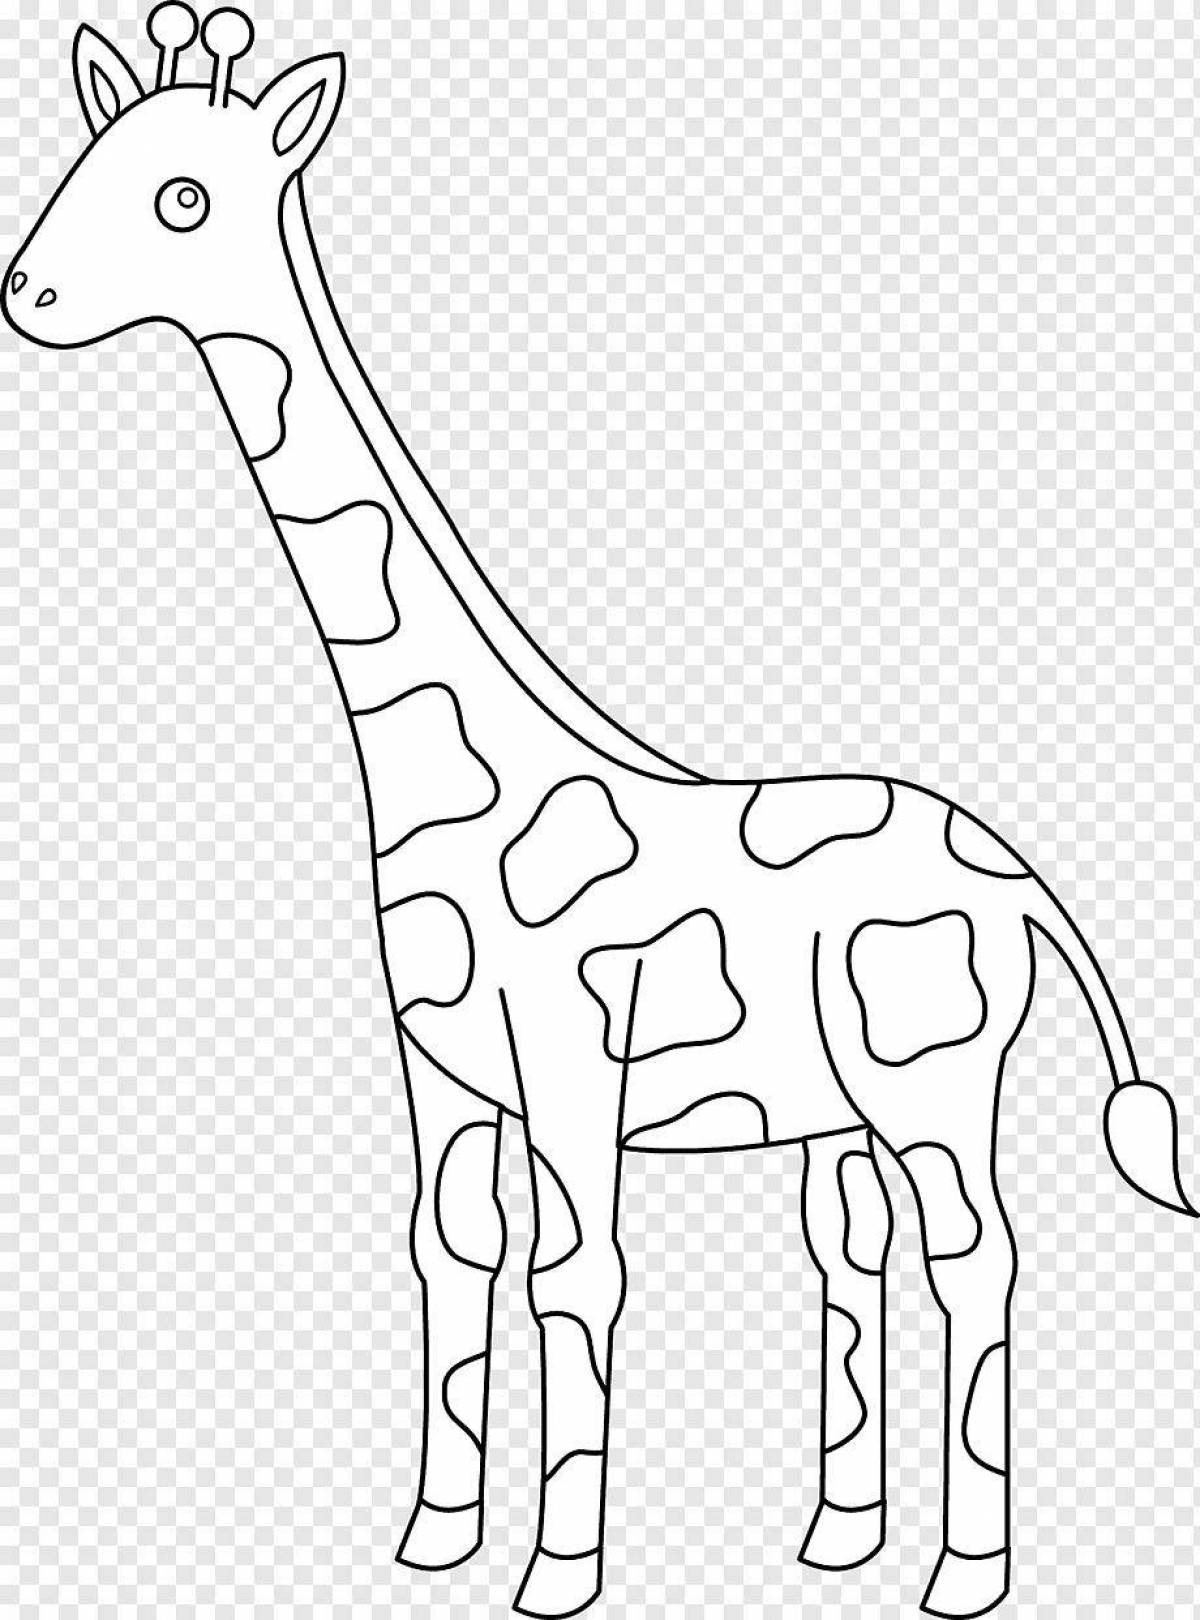 Colorful giraffe without spots for kids